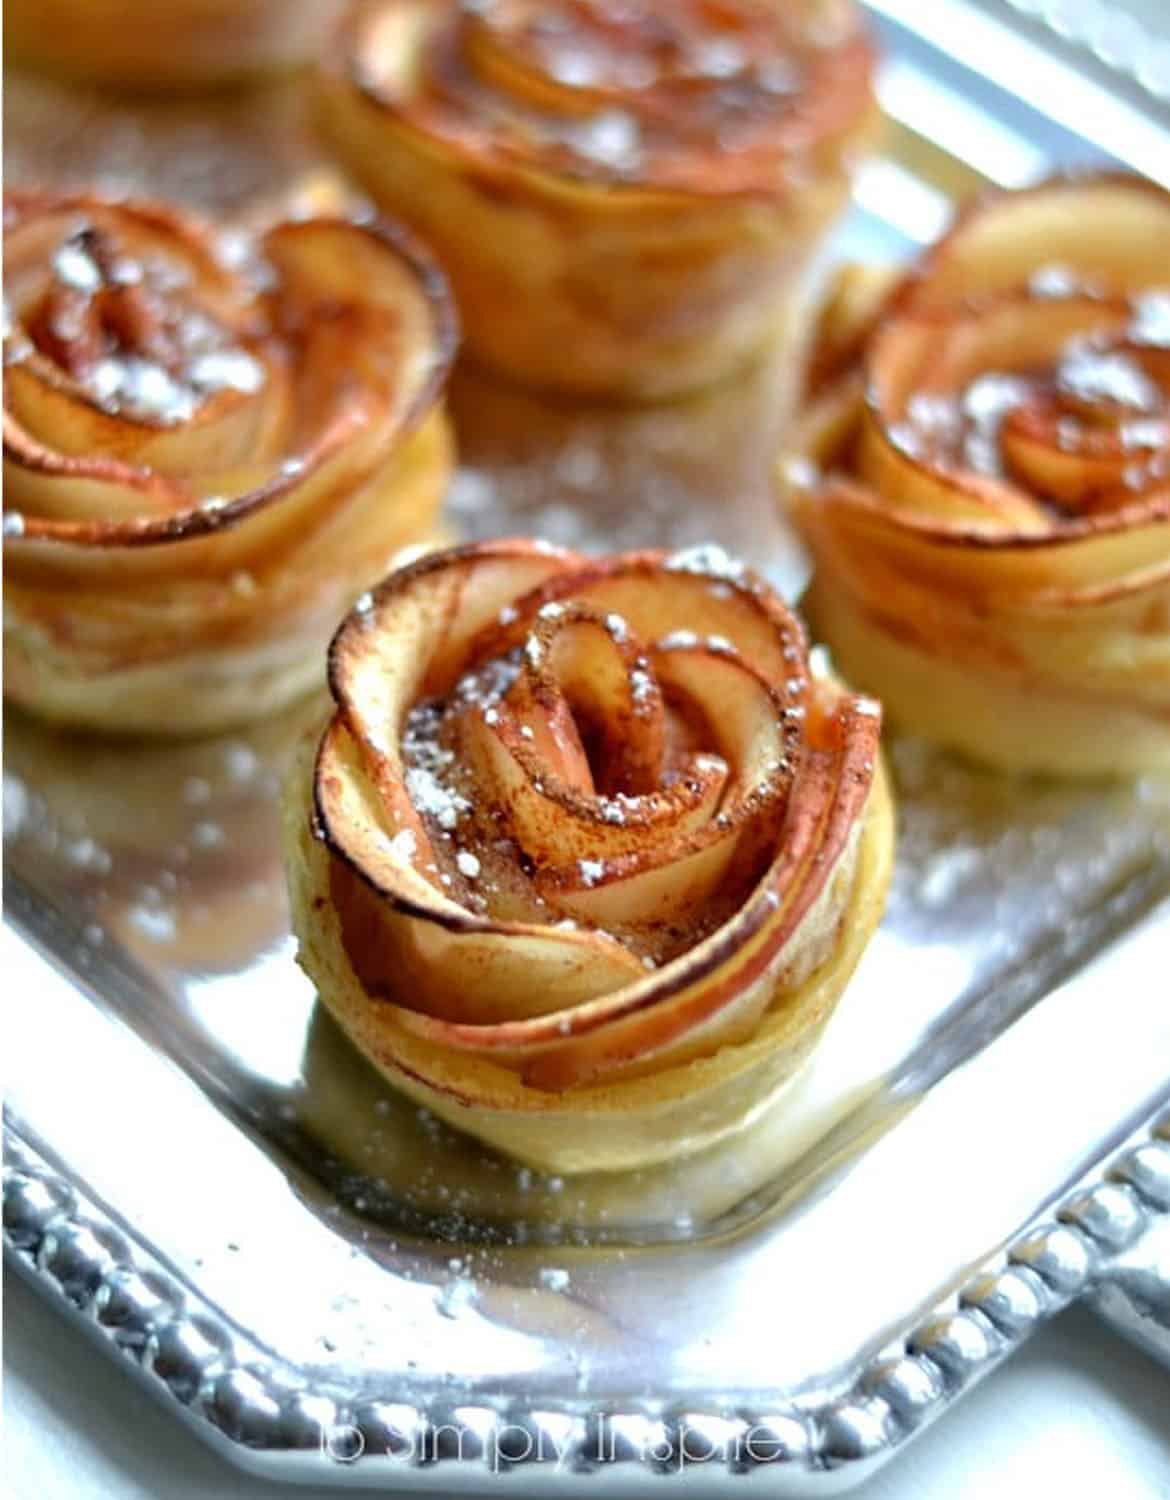 Apple rose puffed pastries on a silver tray - To Simply Inspire